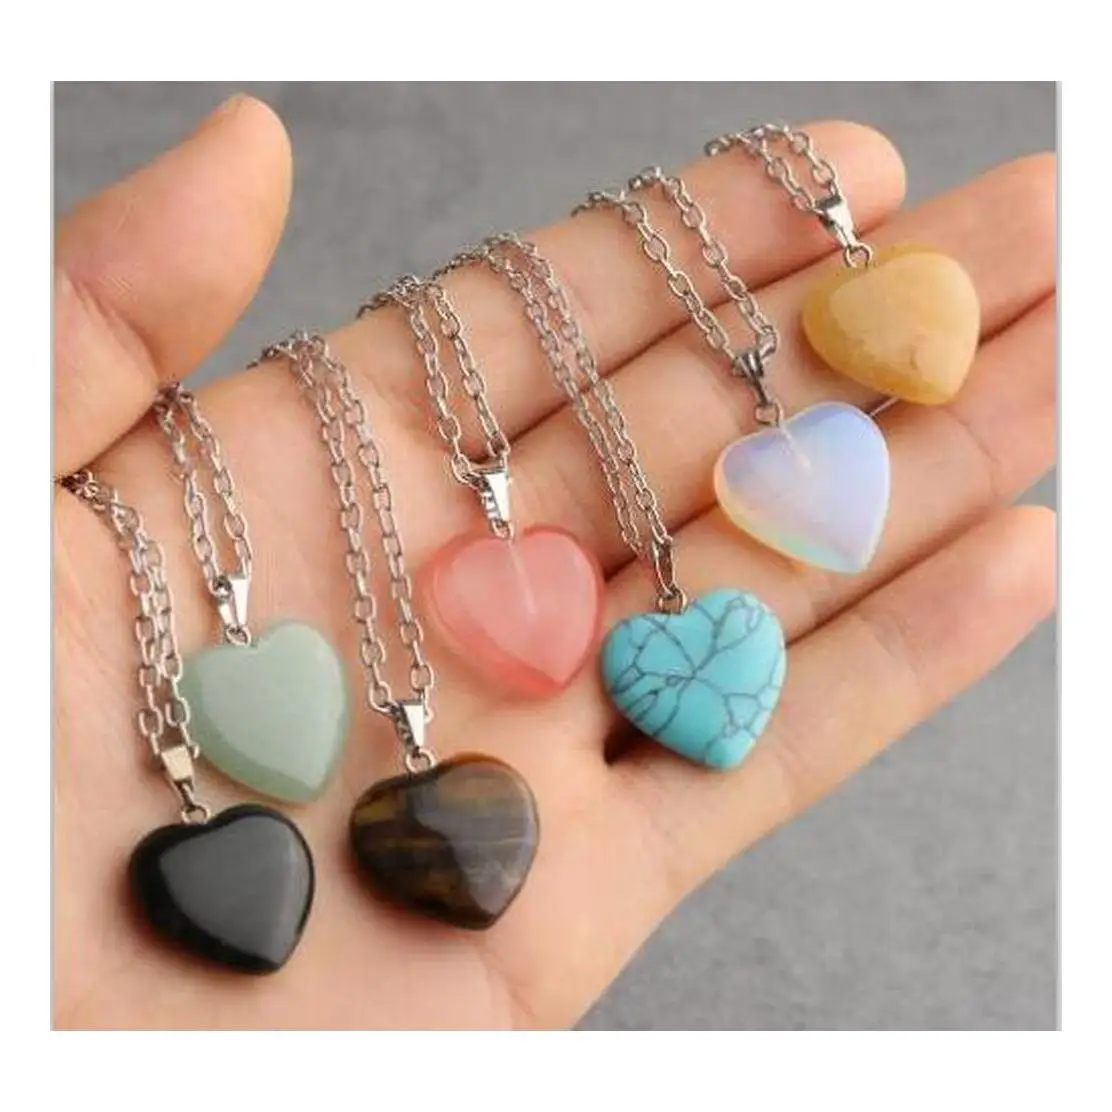 

Heart Hexagonal Prism Turquoise Opal Natural Quartz Crystal Healing Chakra Stone Pendant Necklace Jewelry For Women Gift Accesso